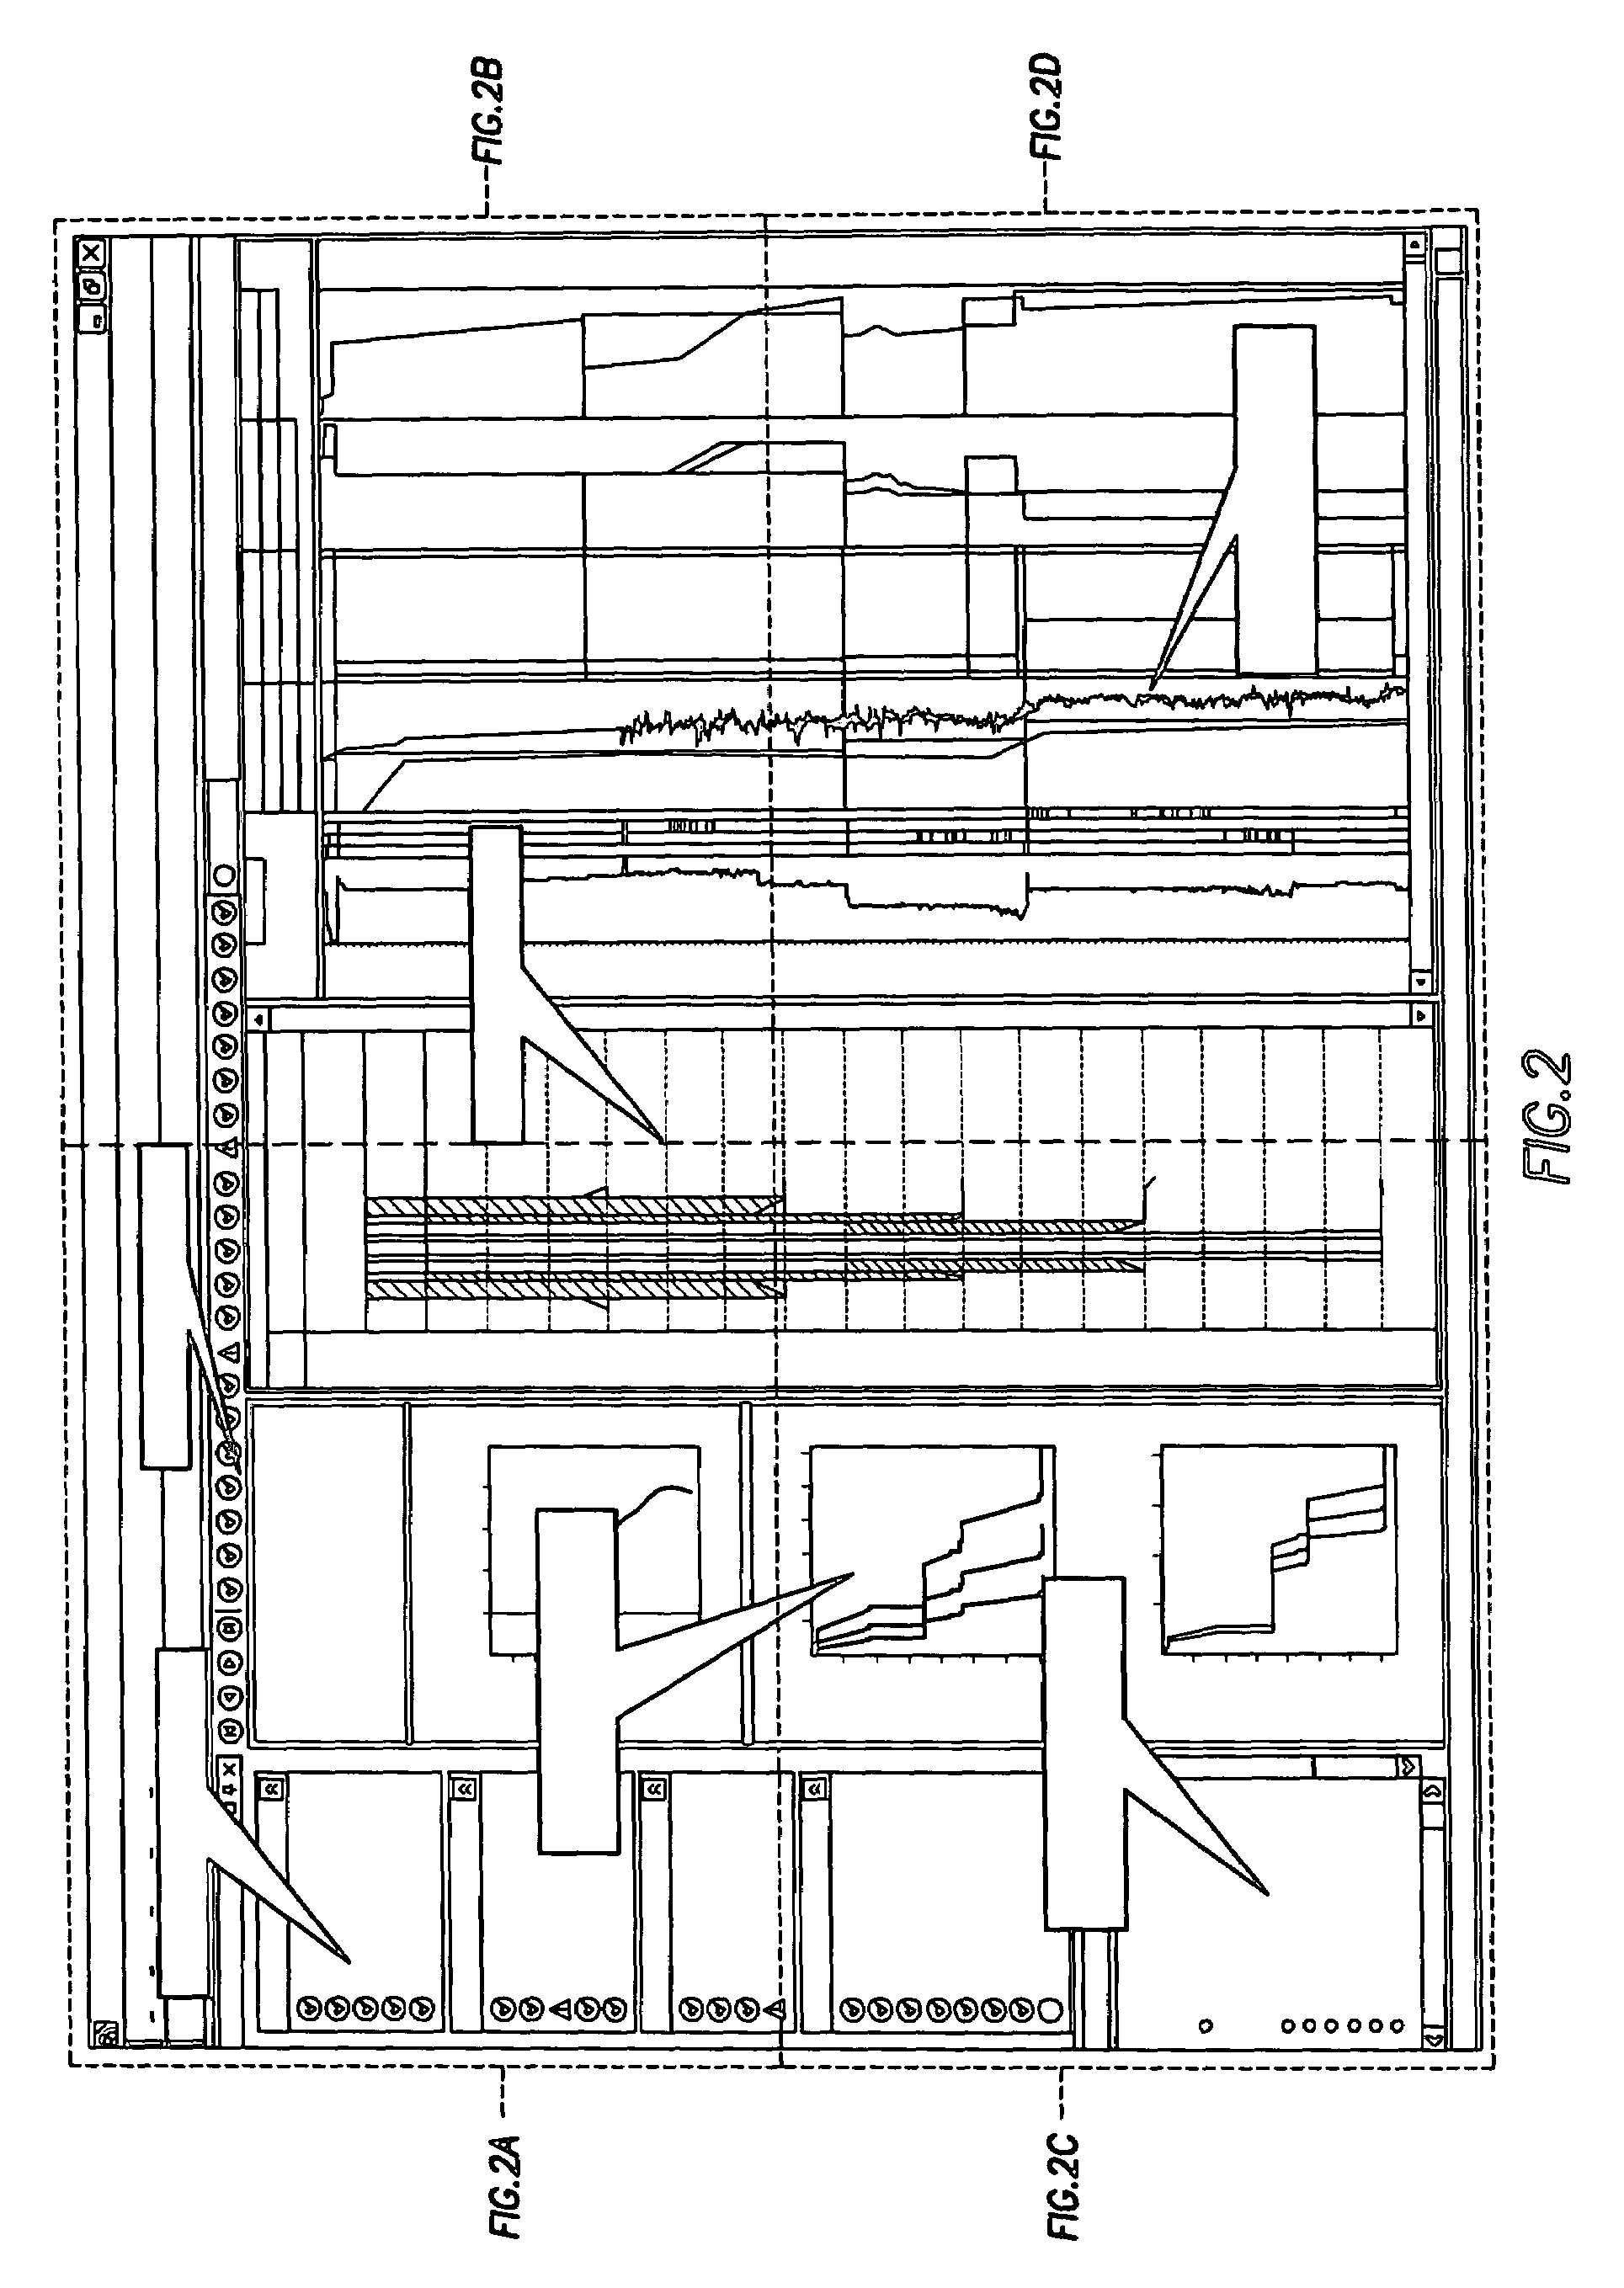 Method and apparatus and program storage device adapted for visualization of qualitative and quantitative risk assessment based on technical wellbore design and earth properties